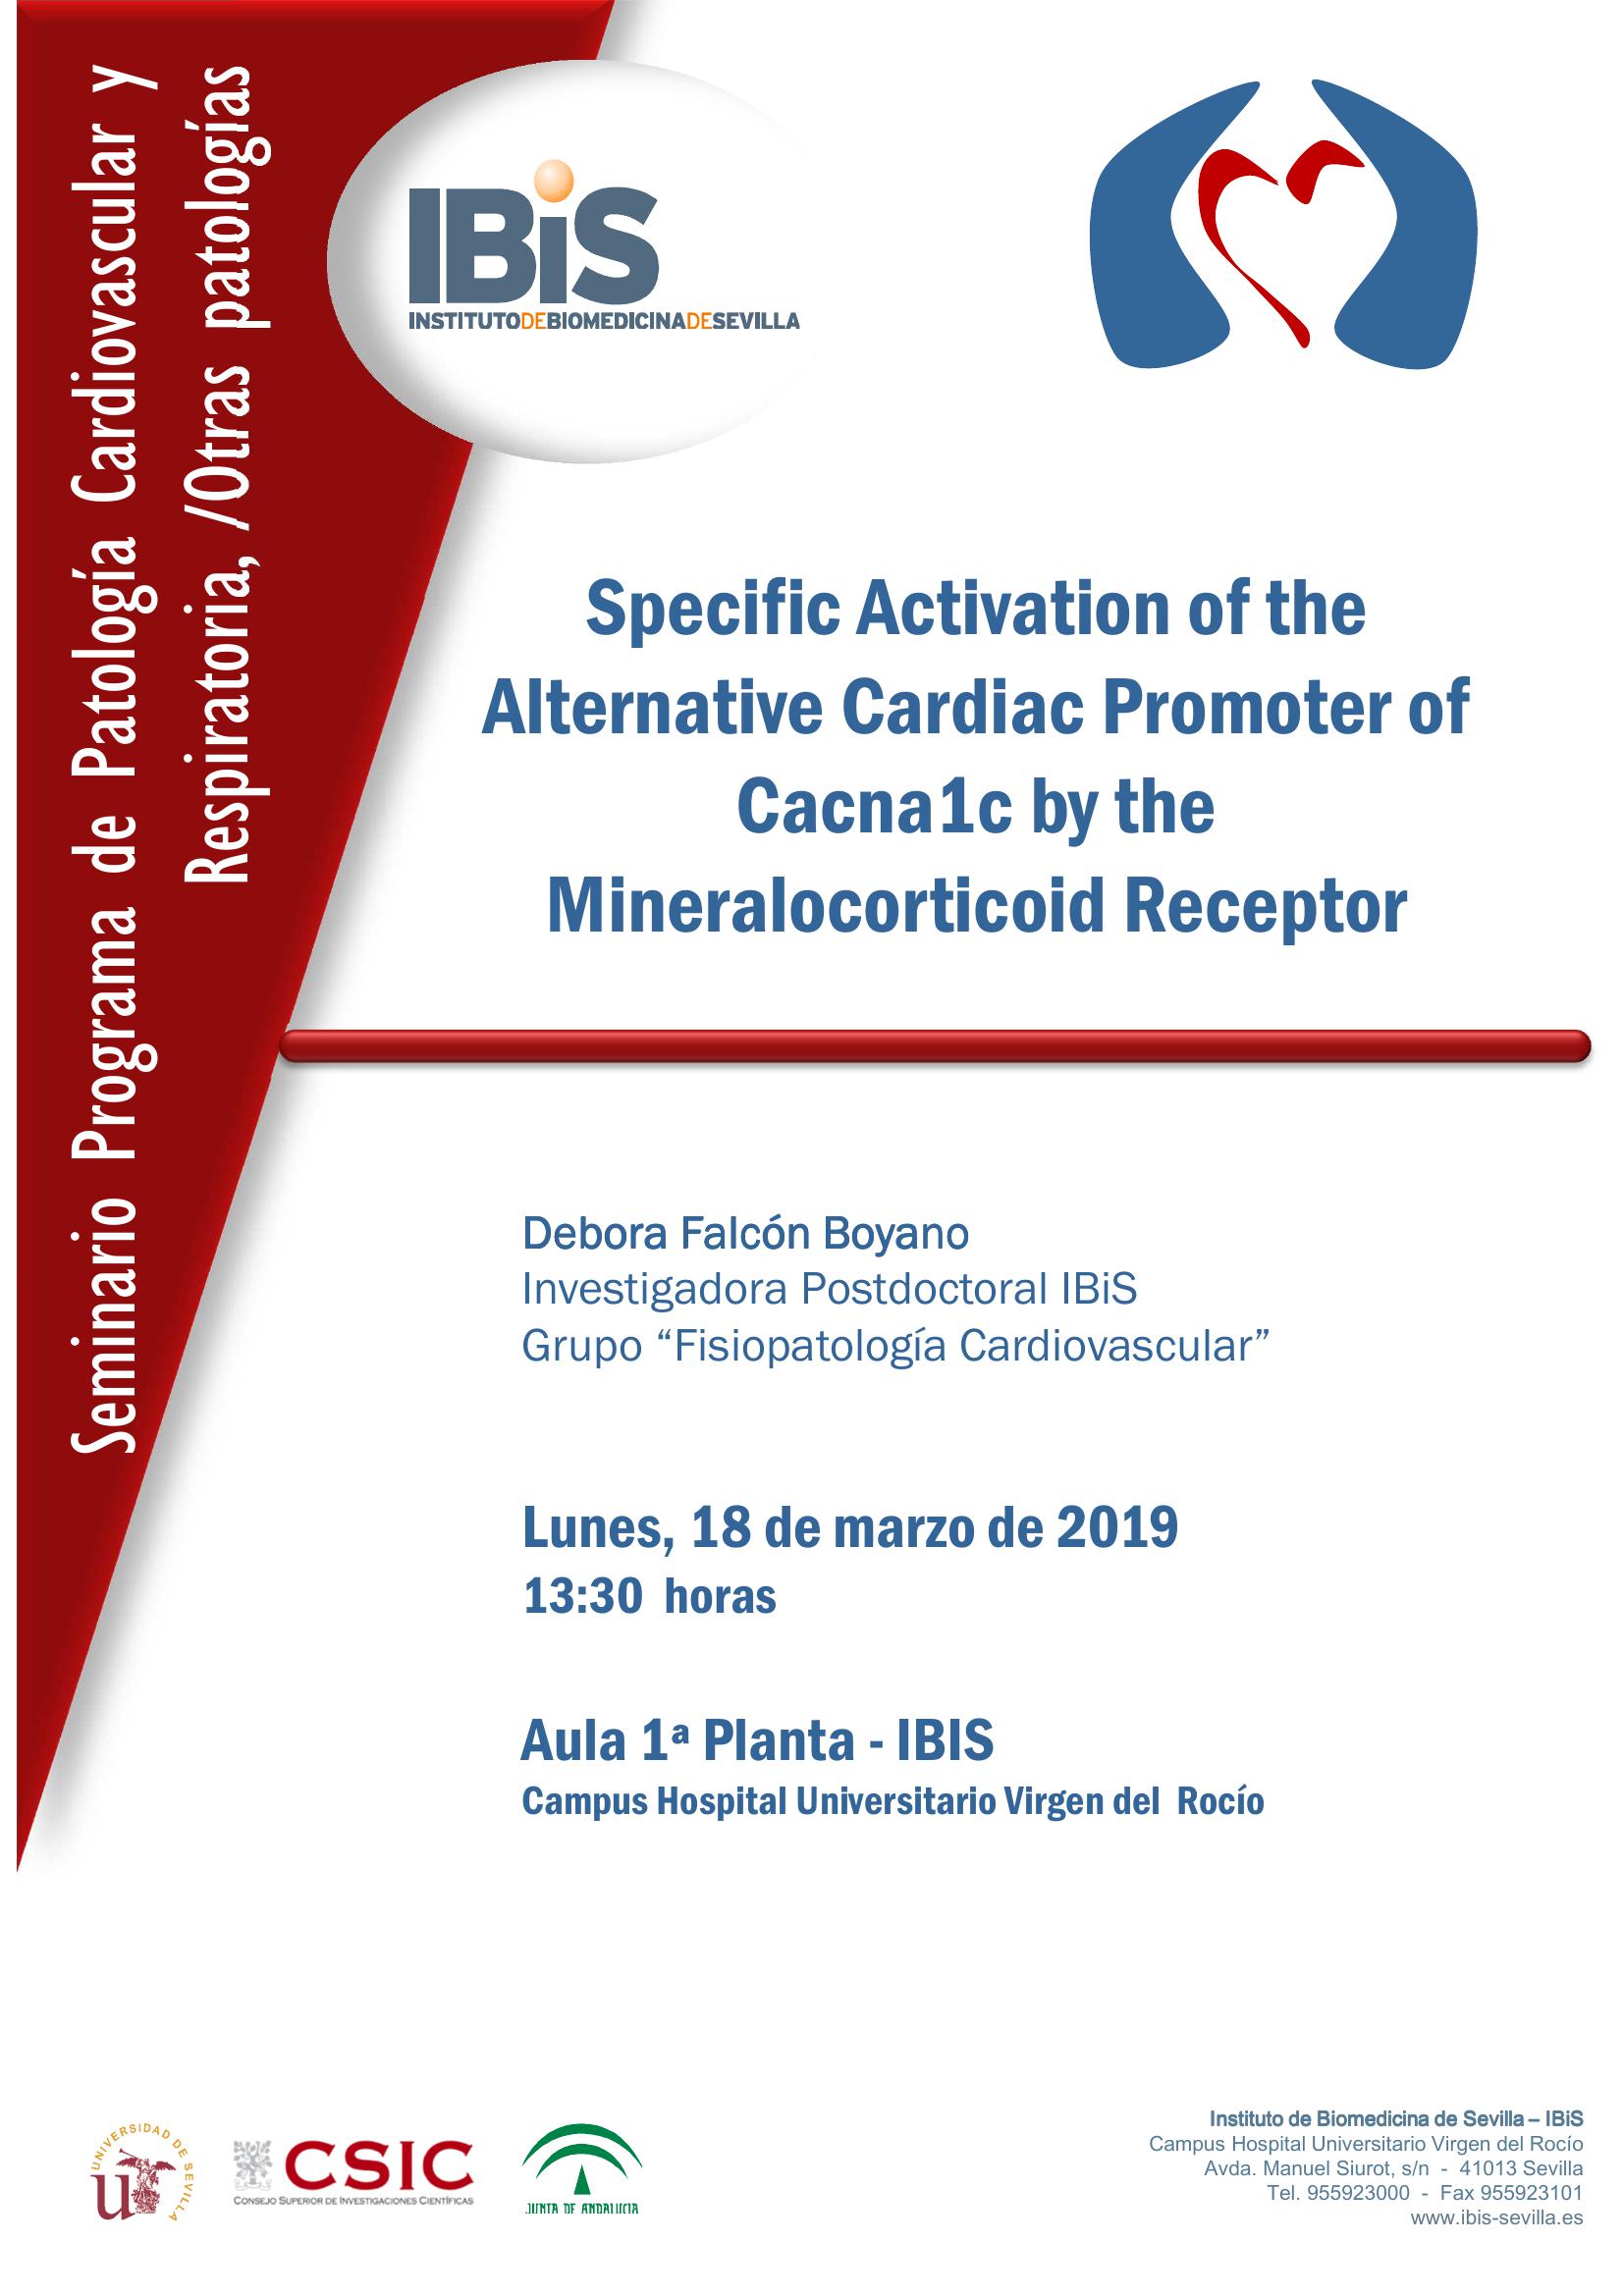 Poster: Specific Activation of the Alternative Cardiac Promoter of Cacna1c by the Mineralocorticoid Receptor